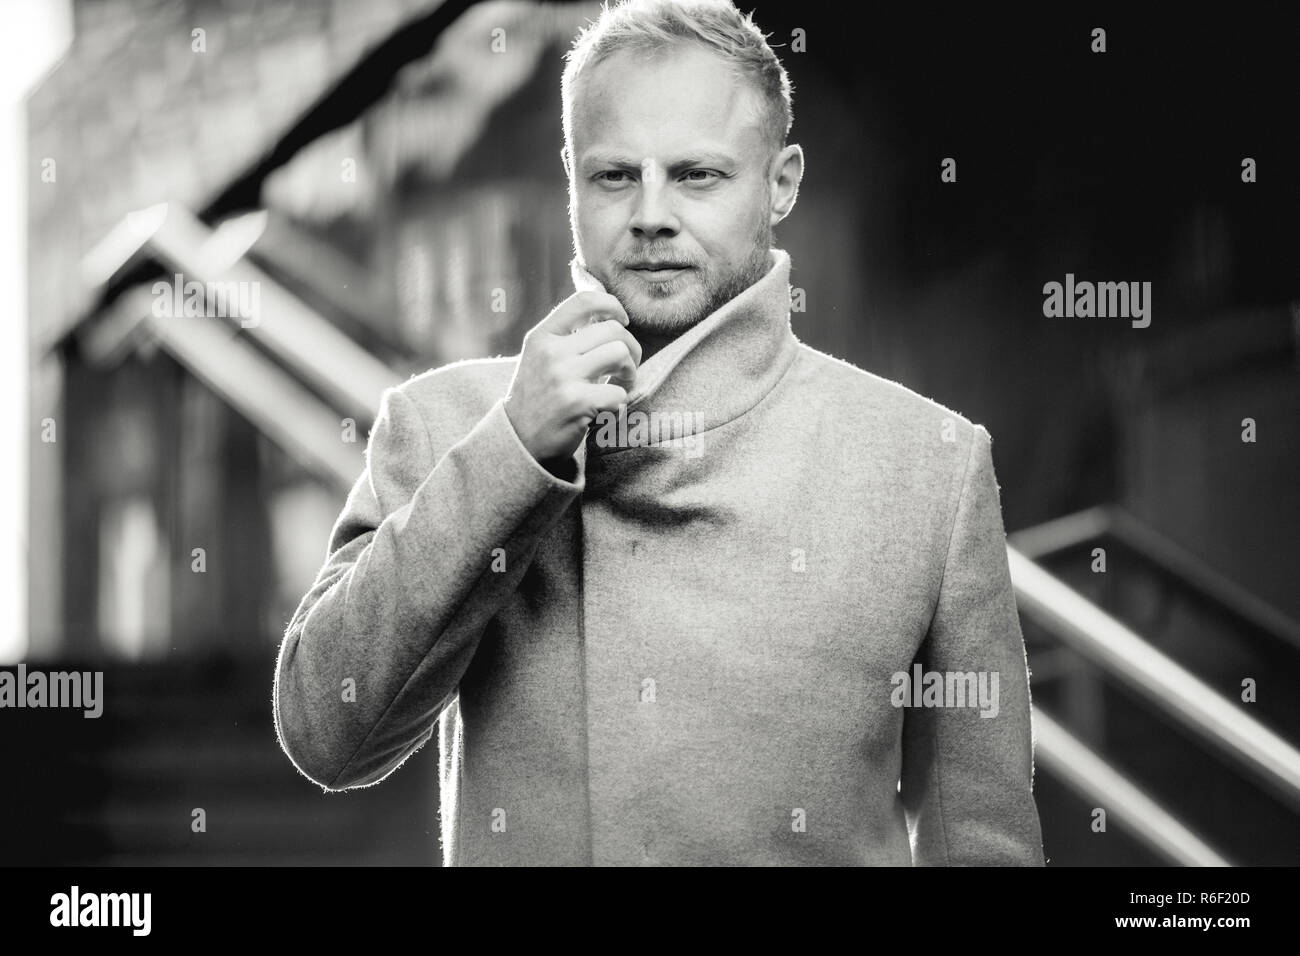 Black and white picture of serious man in coat on street. Stock Photo